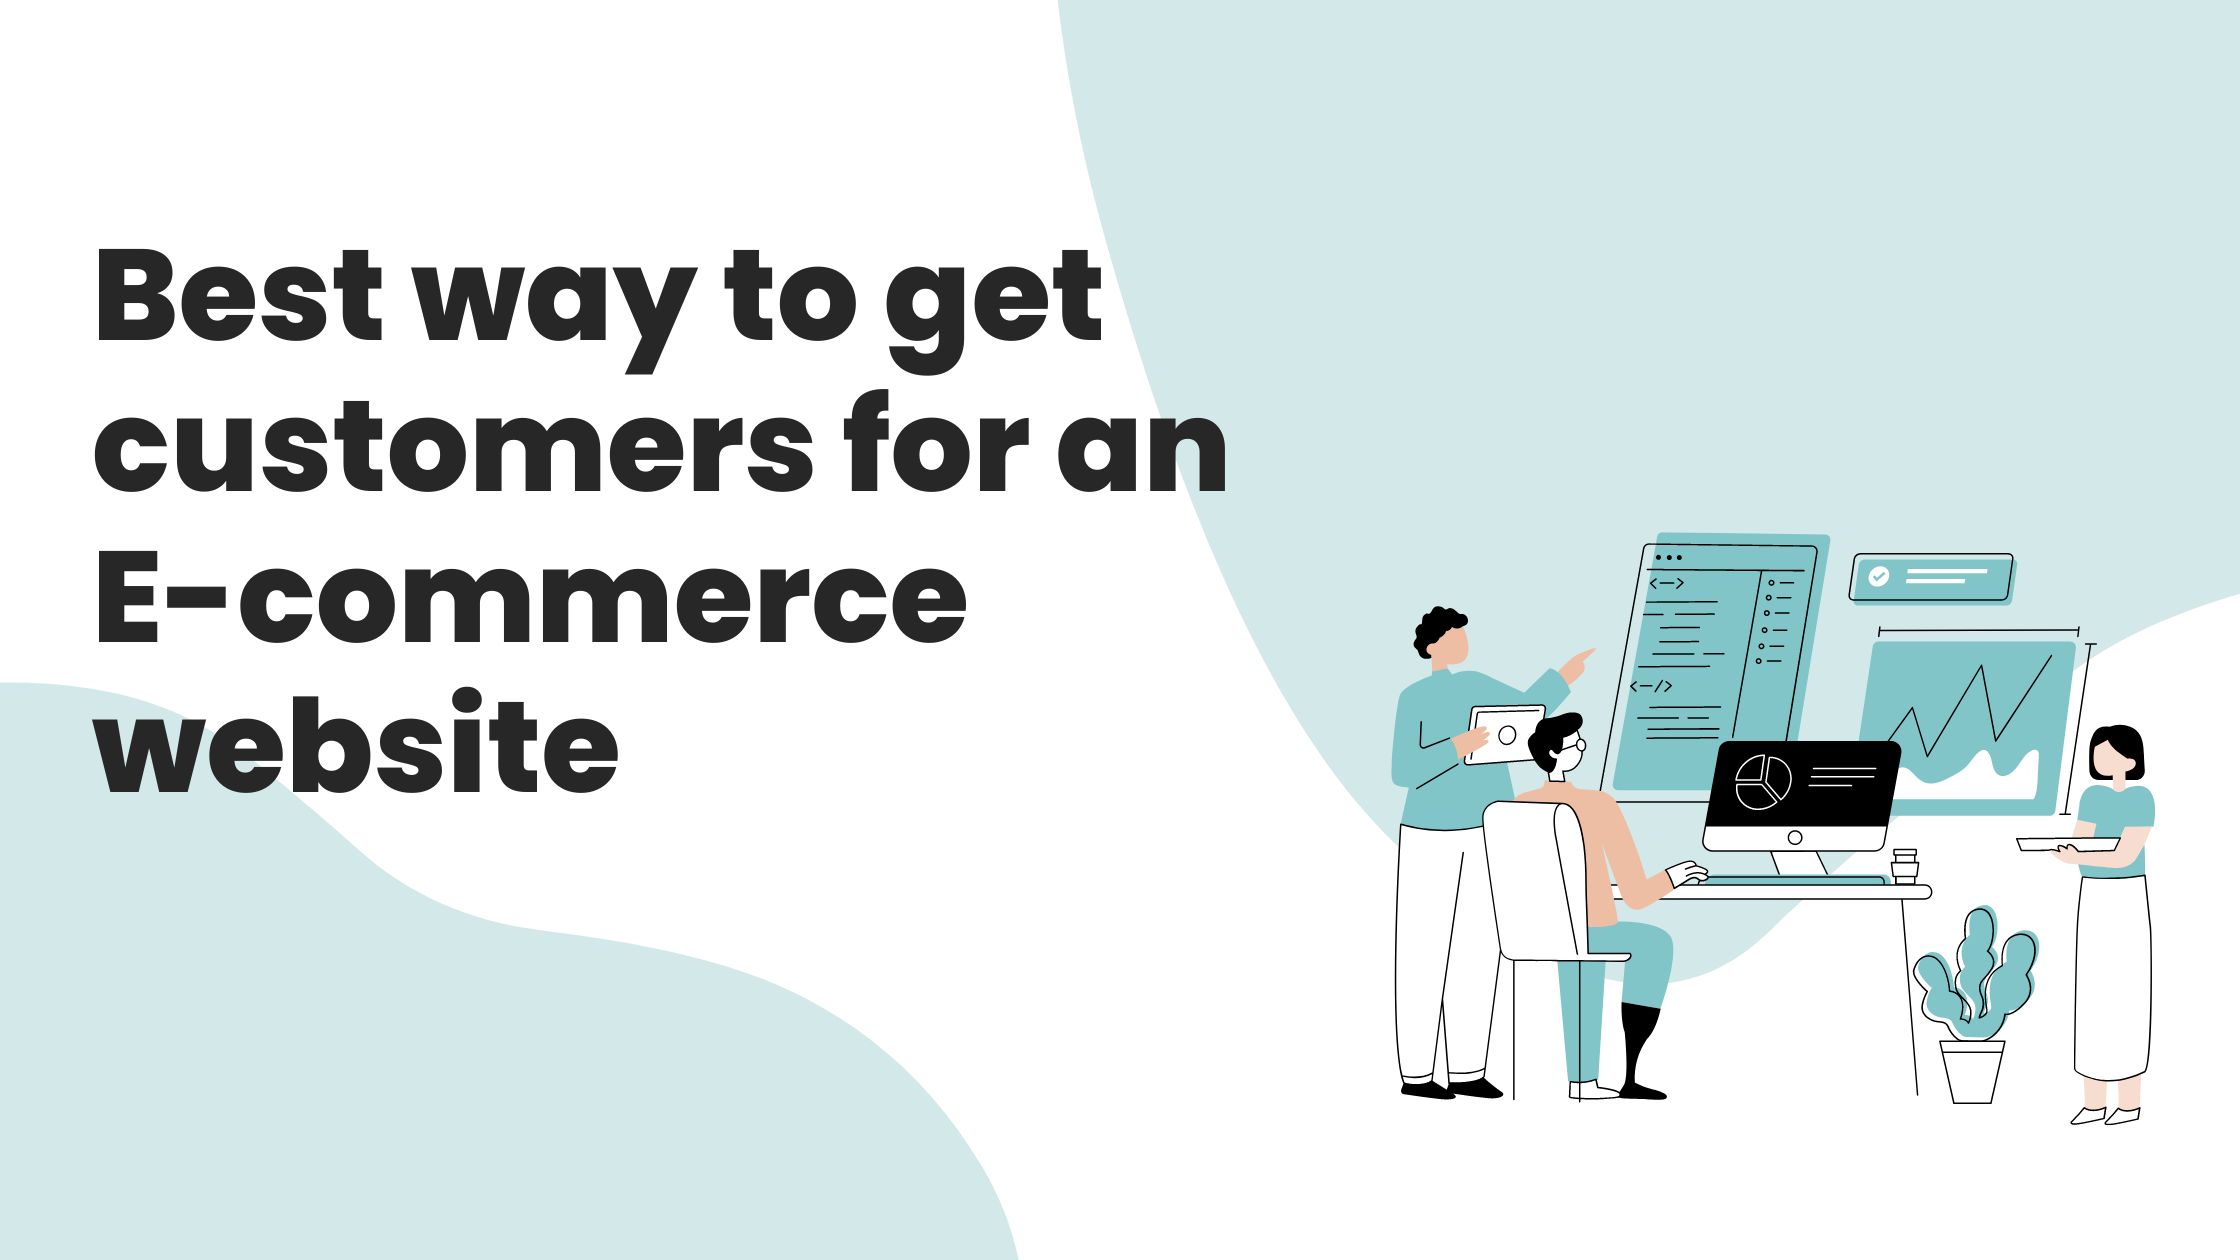 Best way to get customers for an E-commerce website